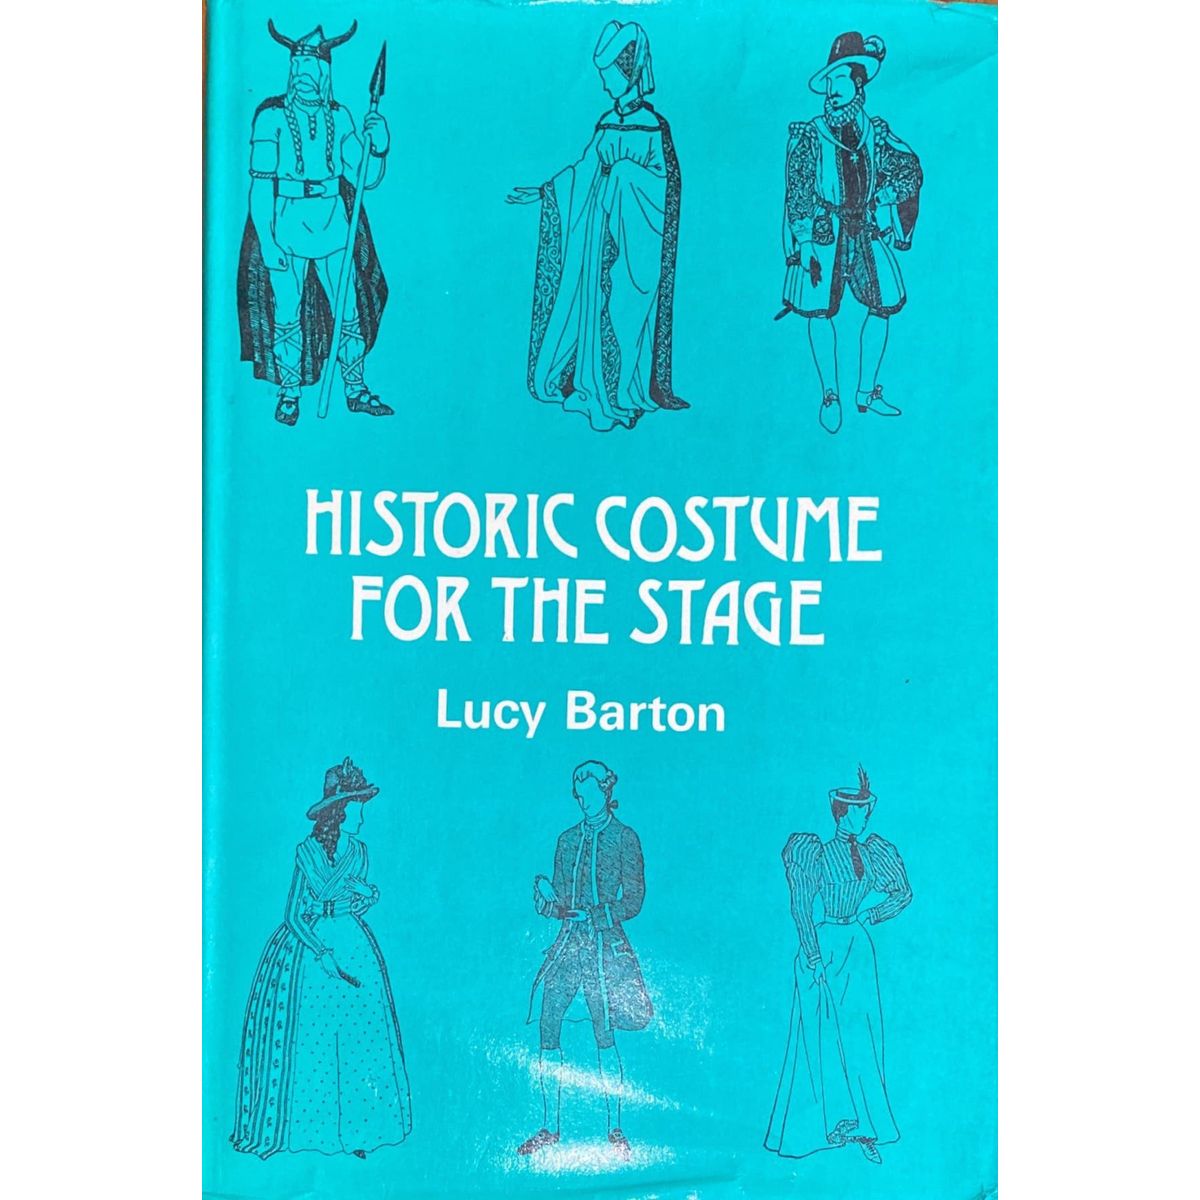 ISBN: 9780713602852 / 0713602856 - Historic Costume for the Stage by Lucy Barton [1961]